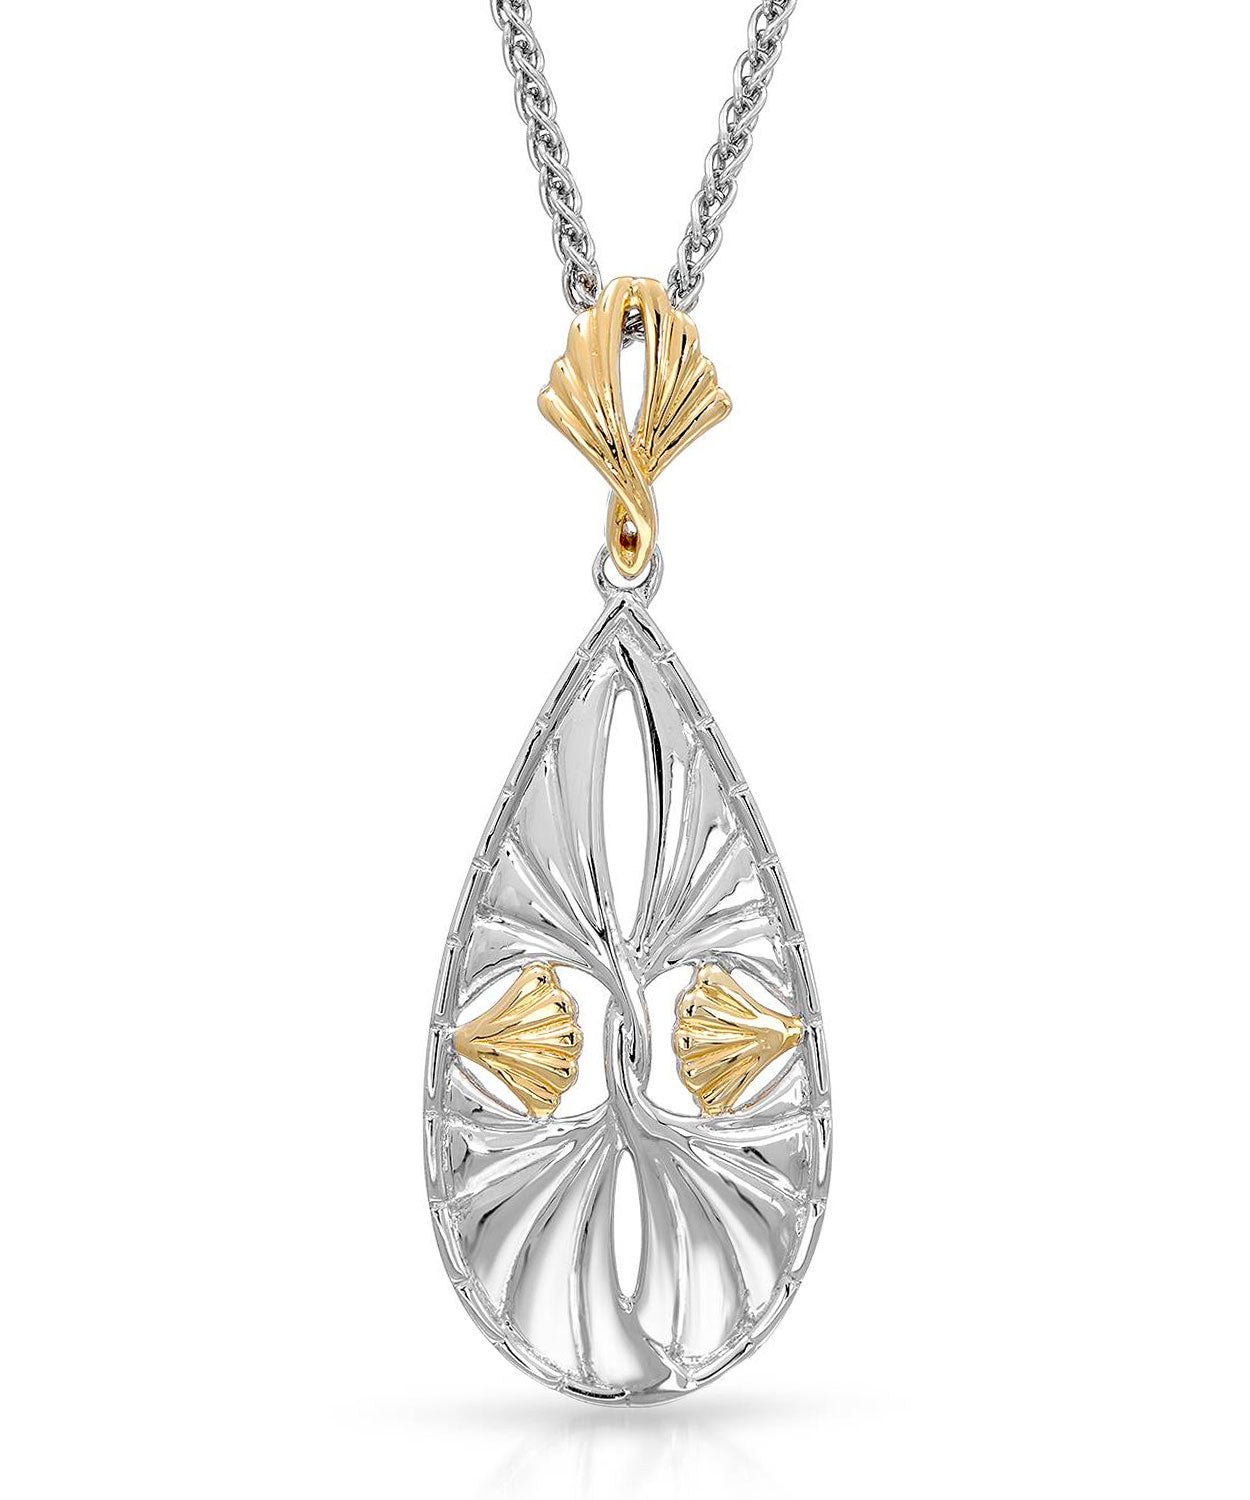 Colore by Simon Golub Rhodium Plated 925 Sterling Silver & 18k Yellow Gold Pendant with Chain View 1